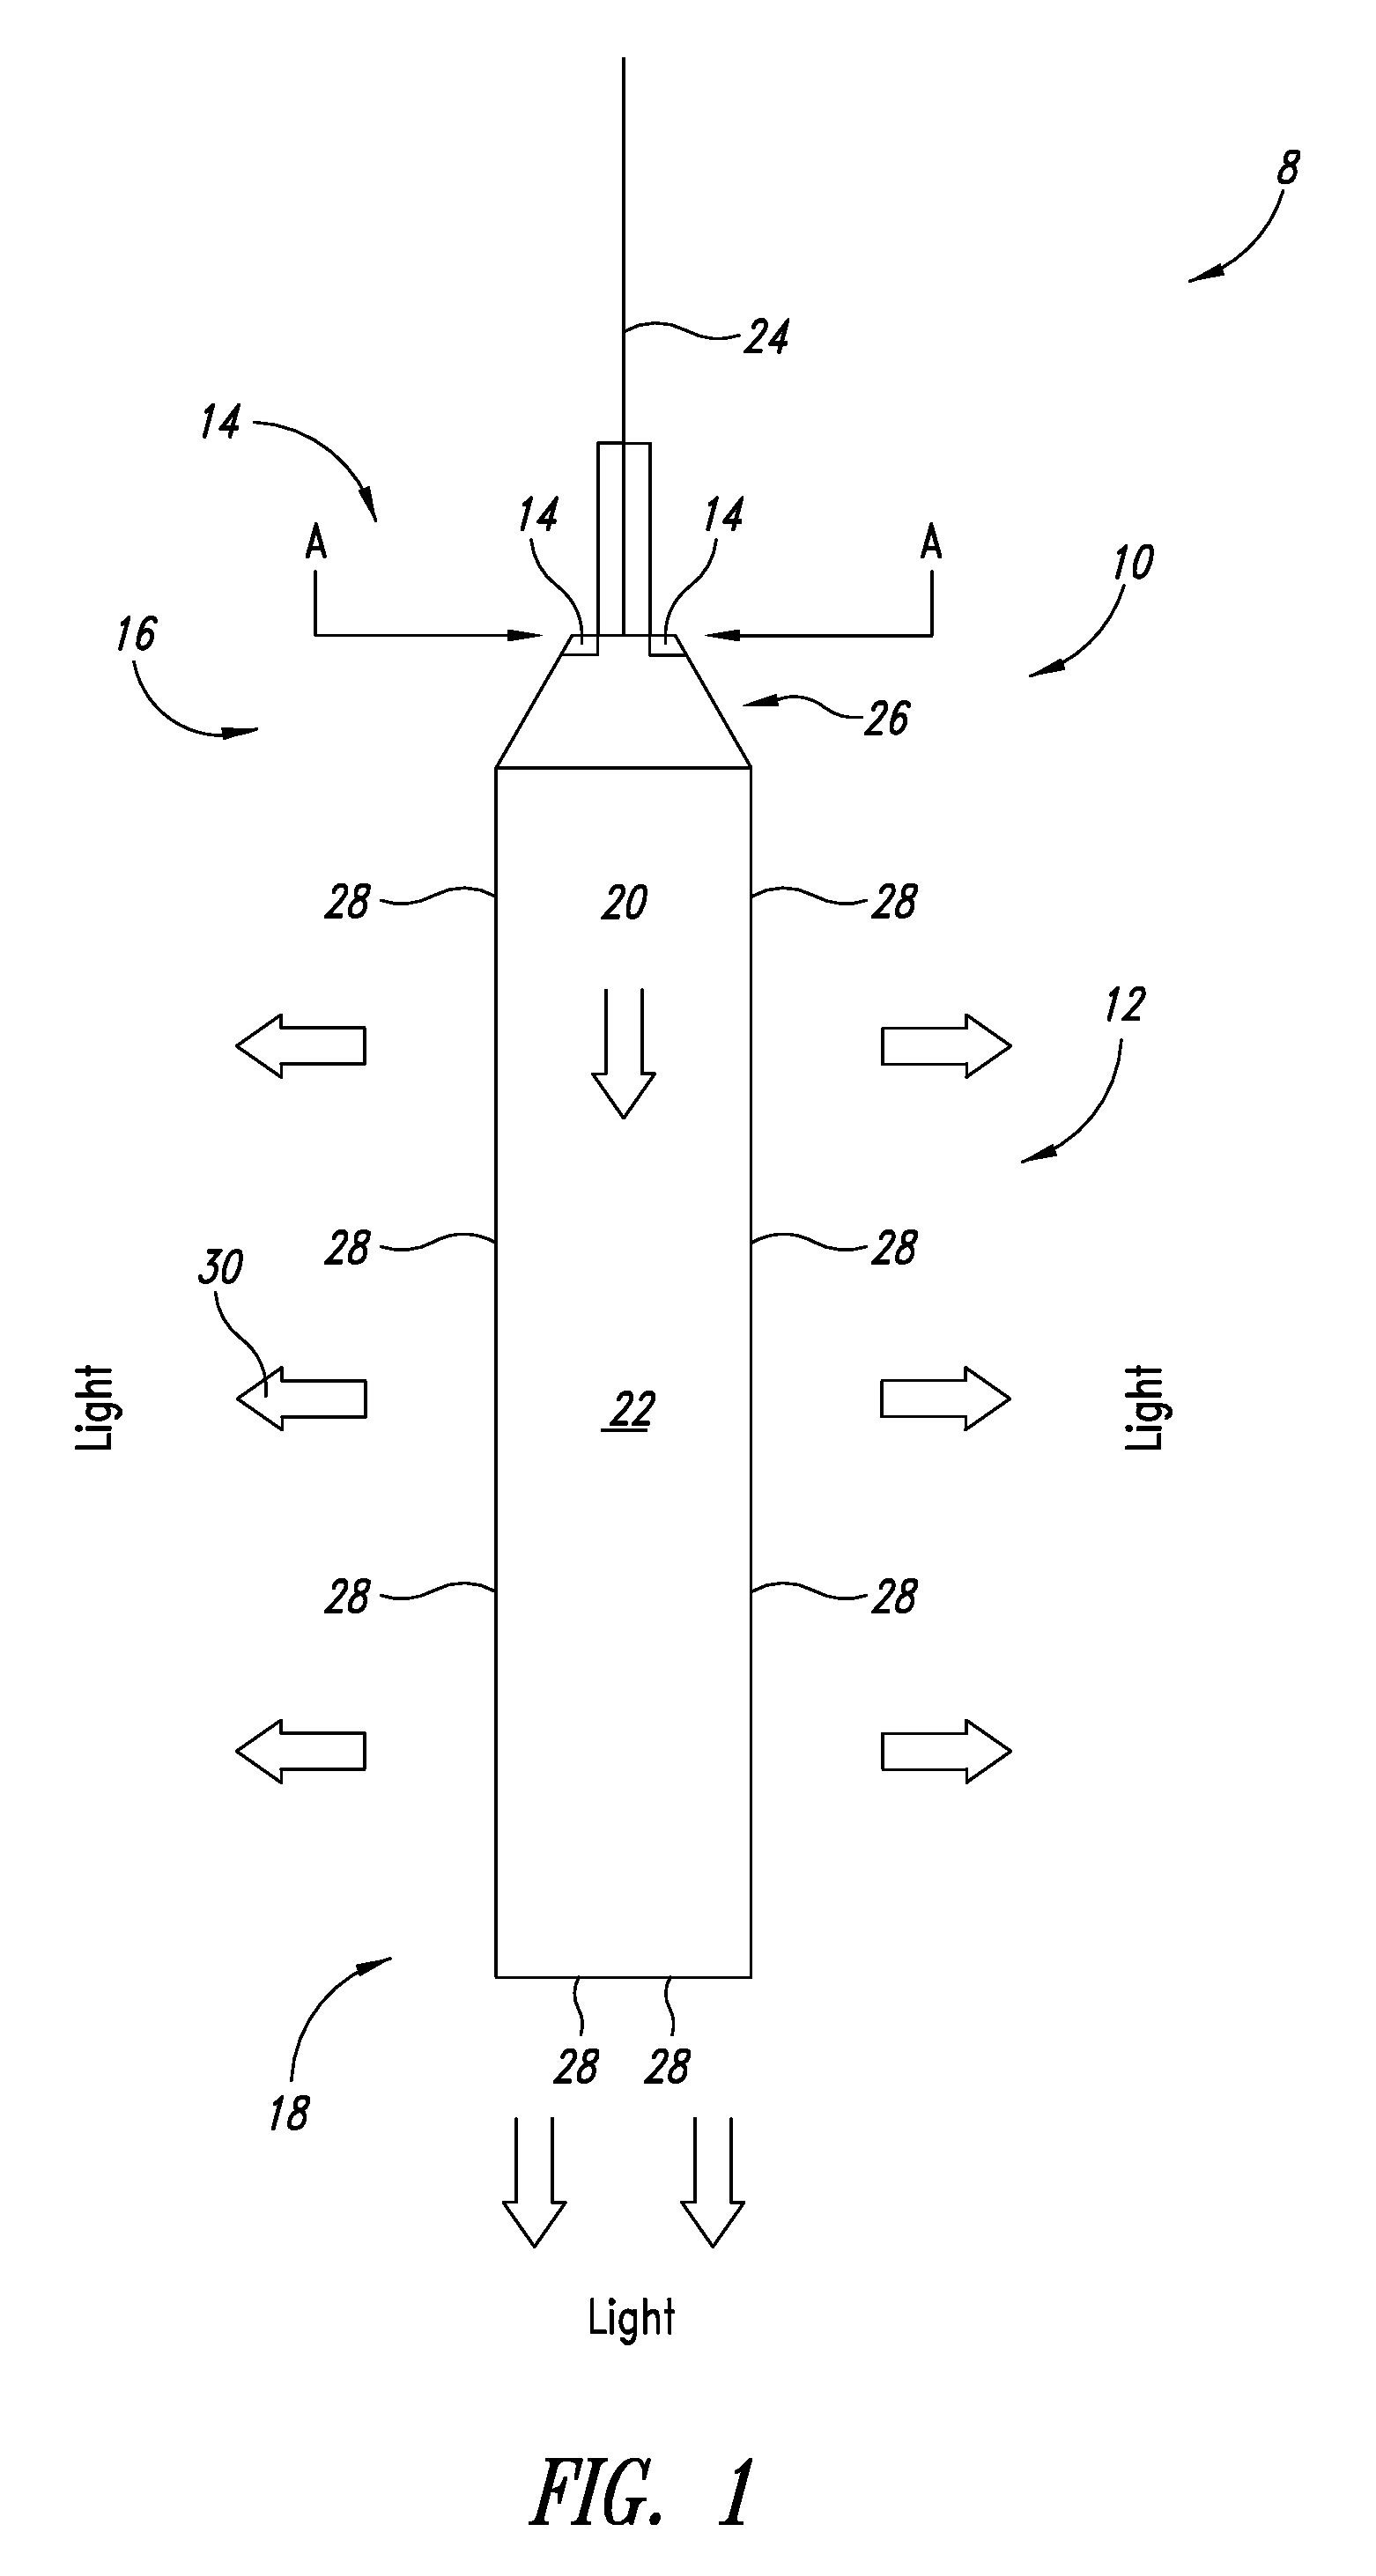 Illumination systems, devices, and methods for biomass production